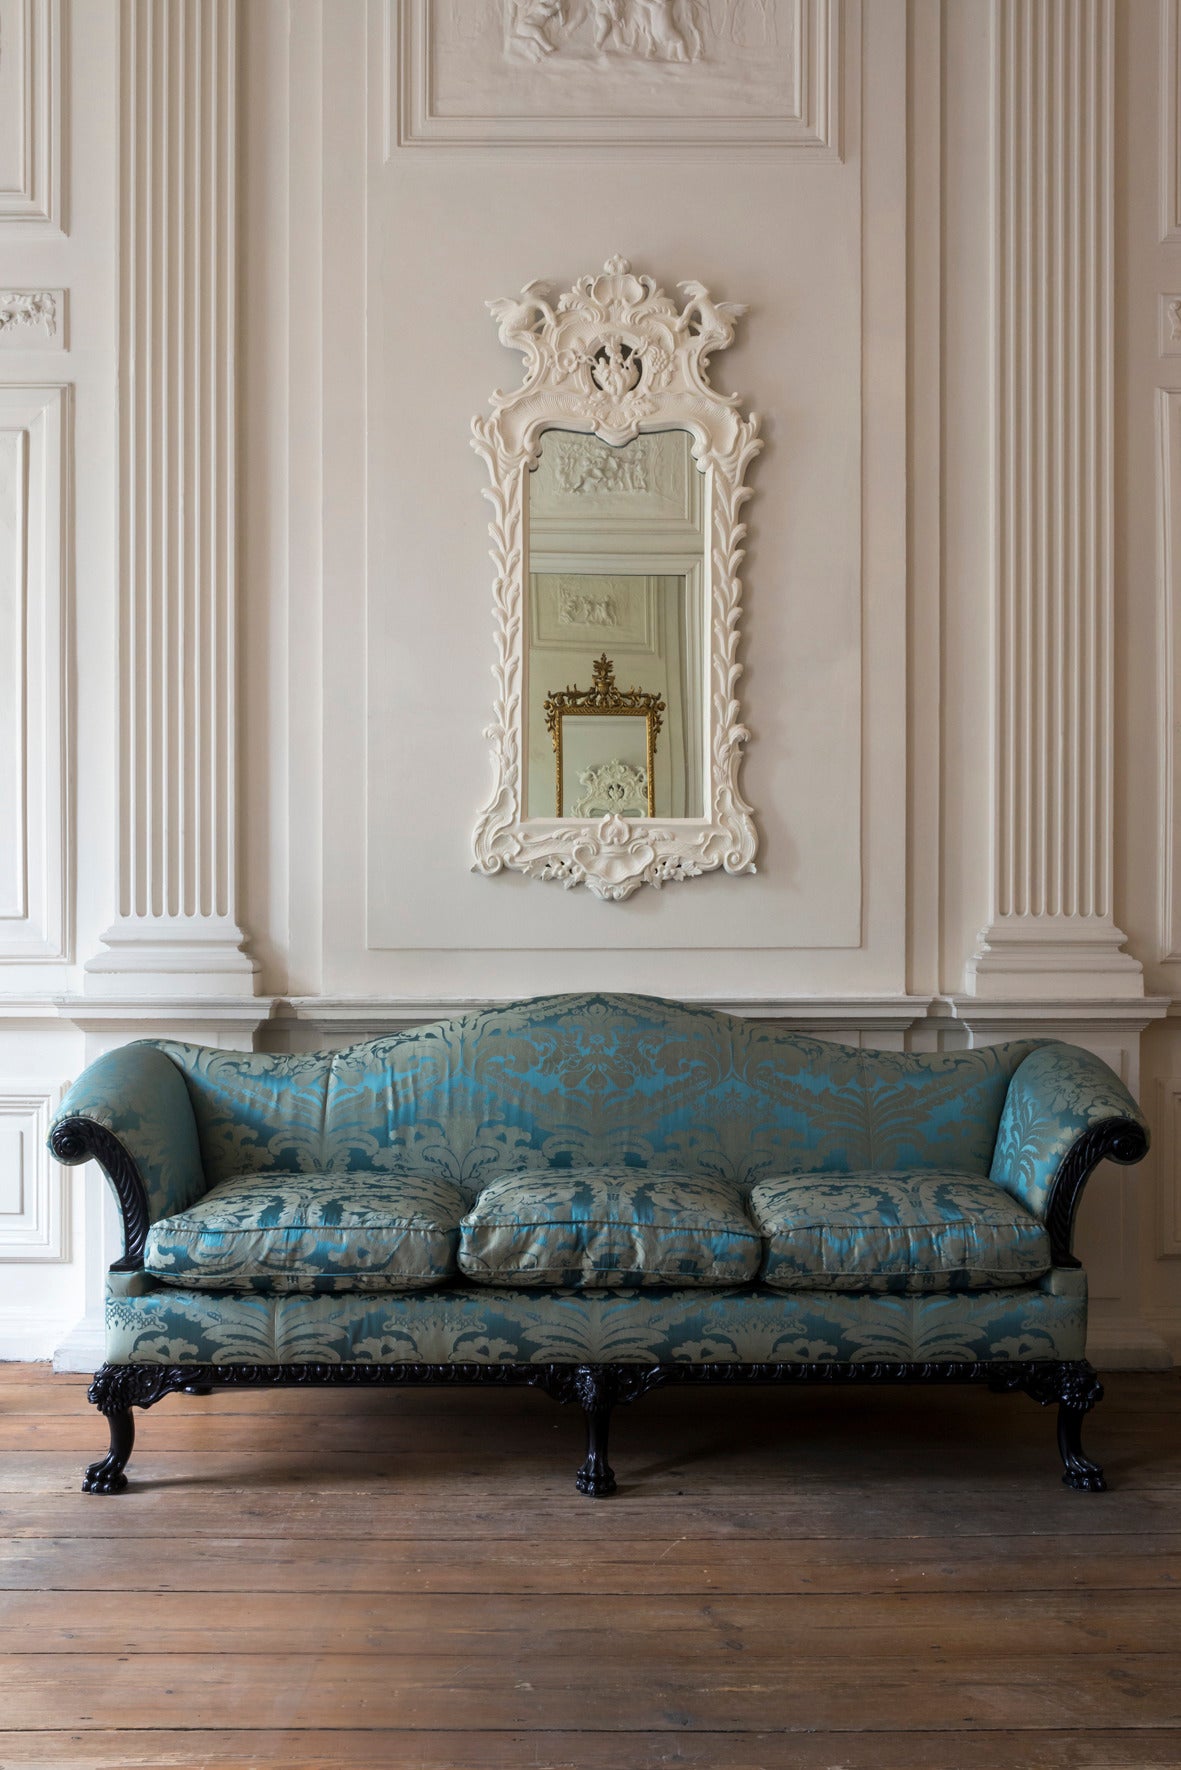 Splendid Edwardian sofa with a beautifully sculpted wooden frame and silk damask upholstery by Rubelli. The cushions are filled exclusively with feathers.